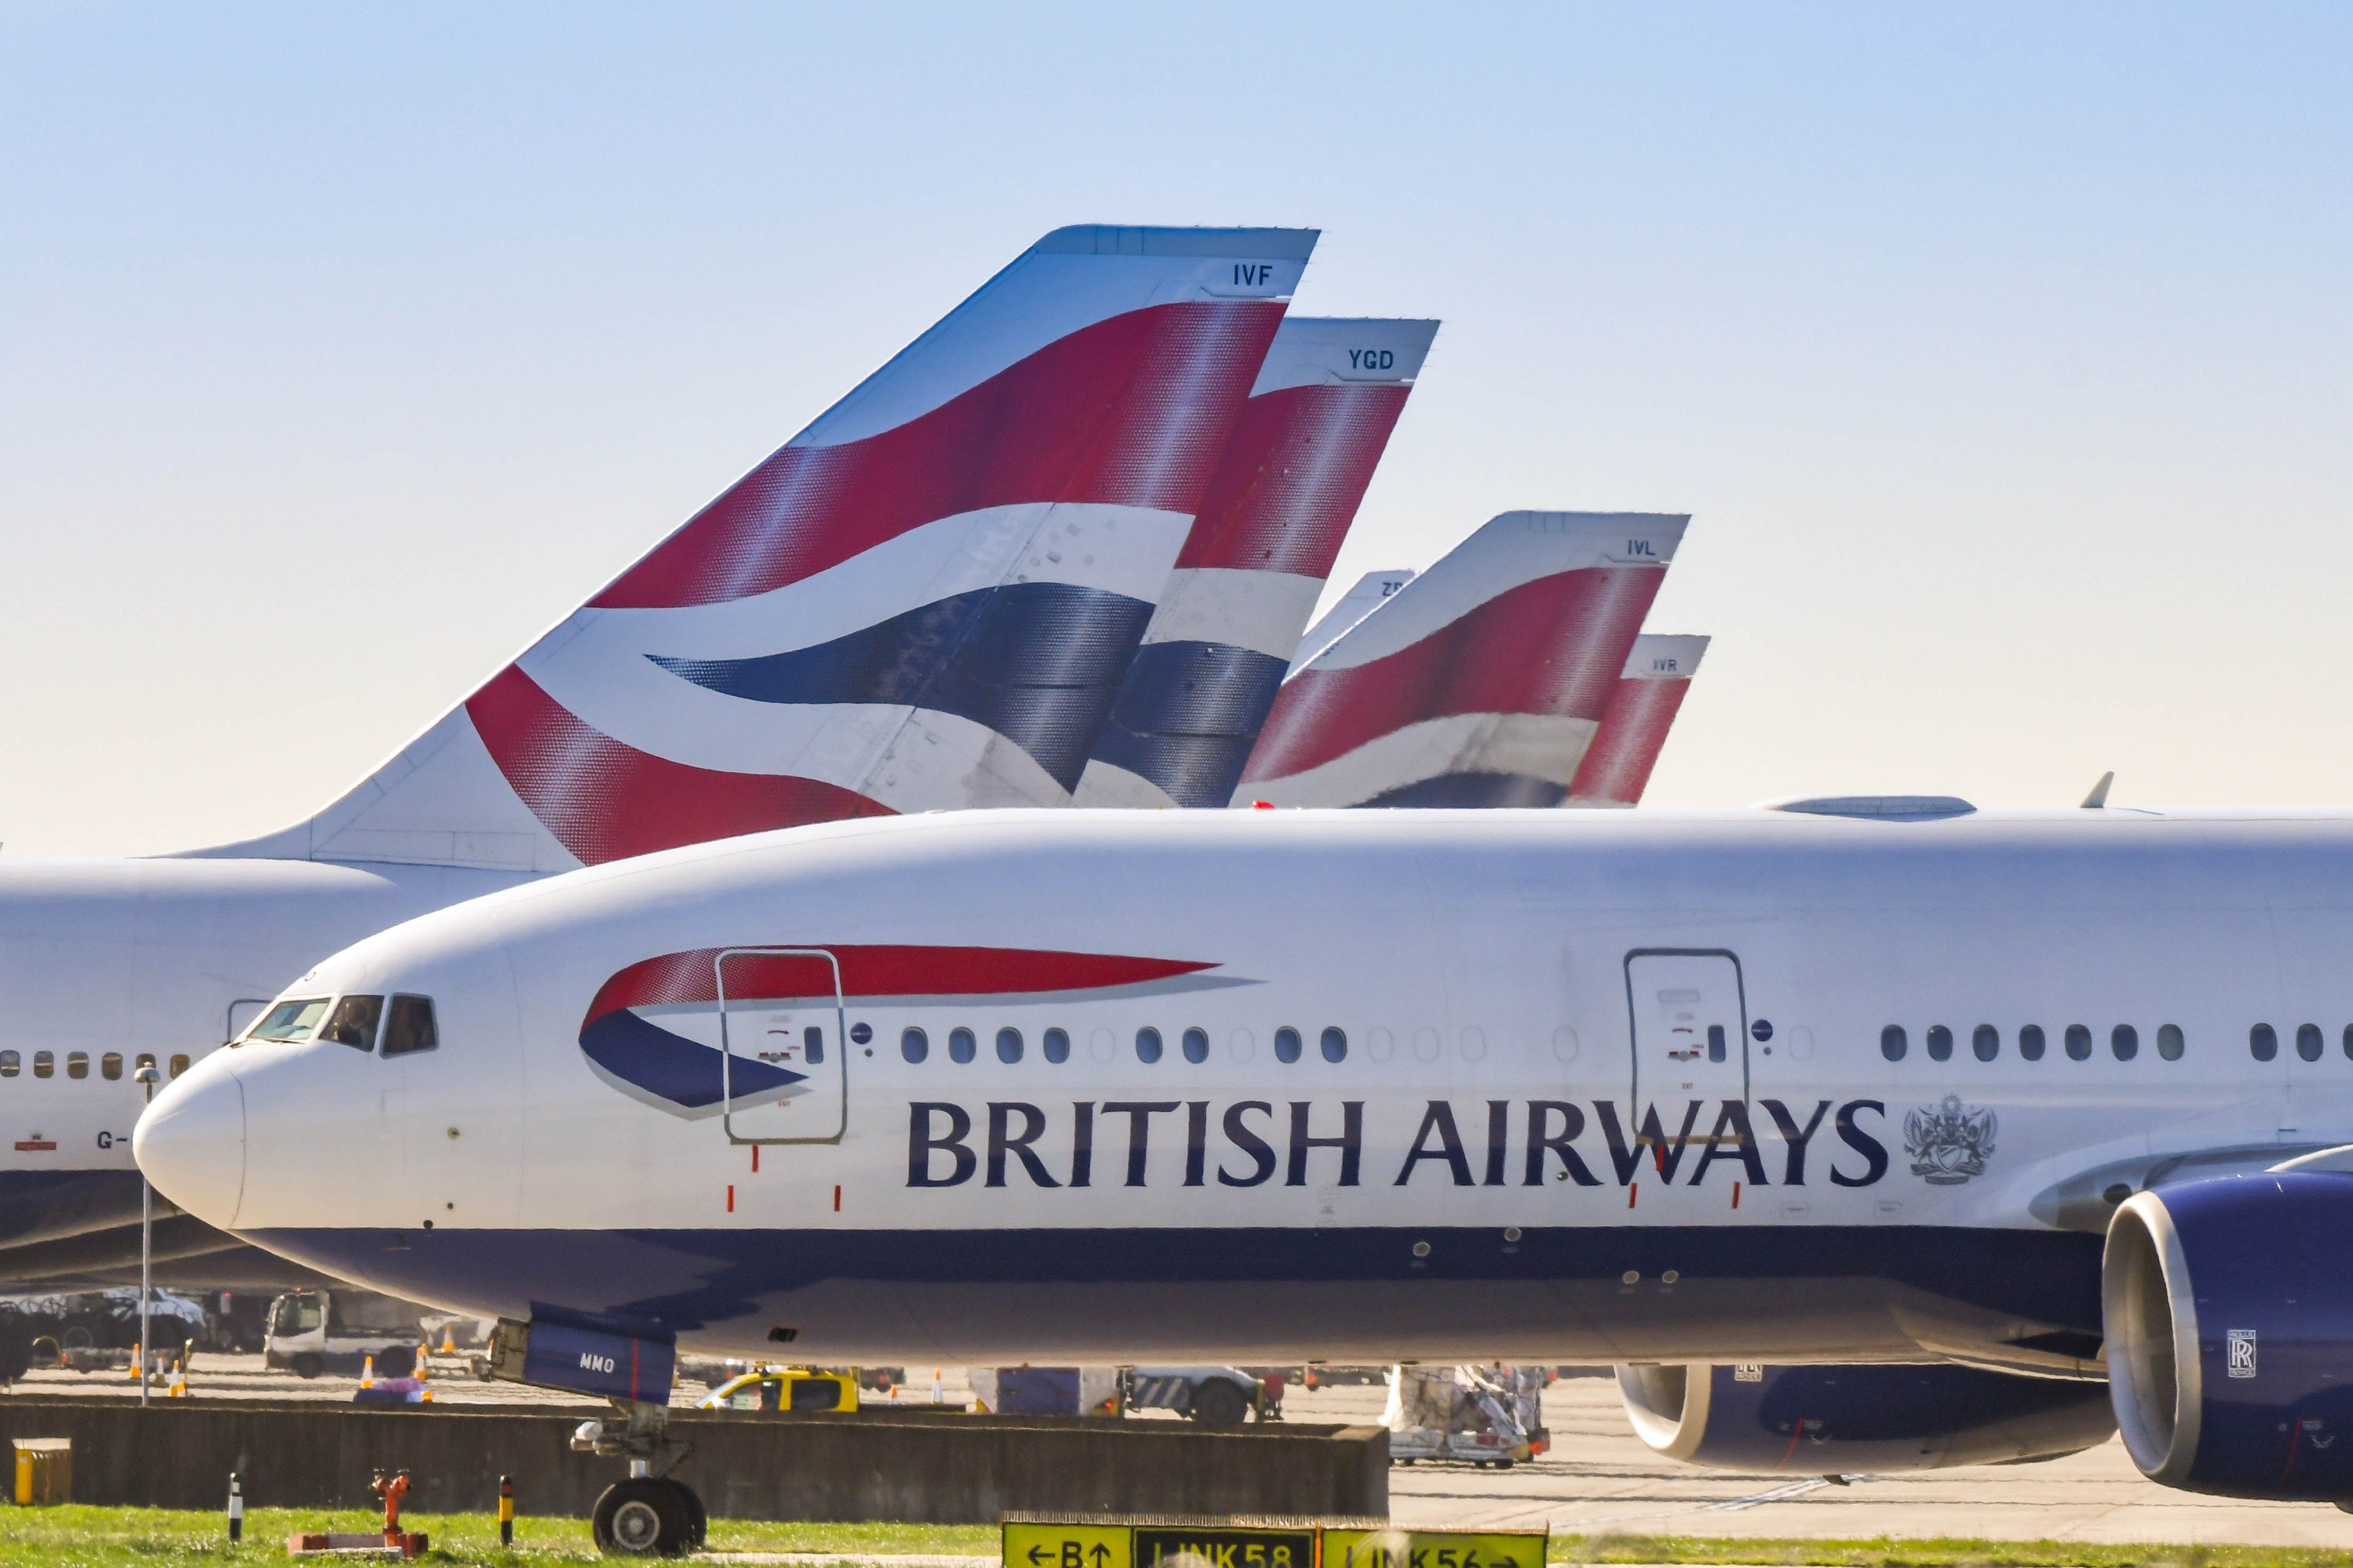 Boeing 777 long haul airliner operated by British Airways taxiing for take off at London Heathrow Airport past tail fins of the company's other aircraft